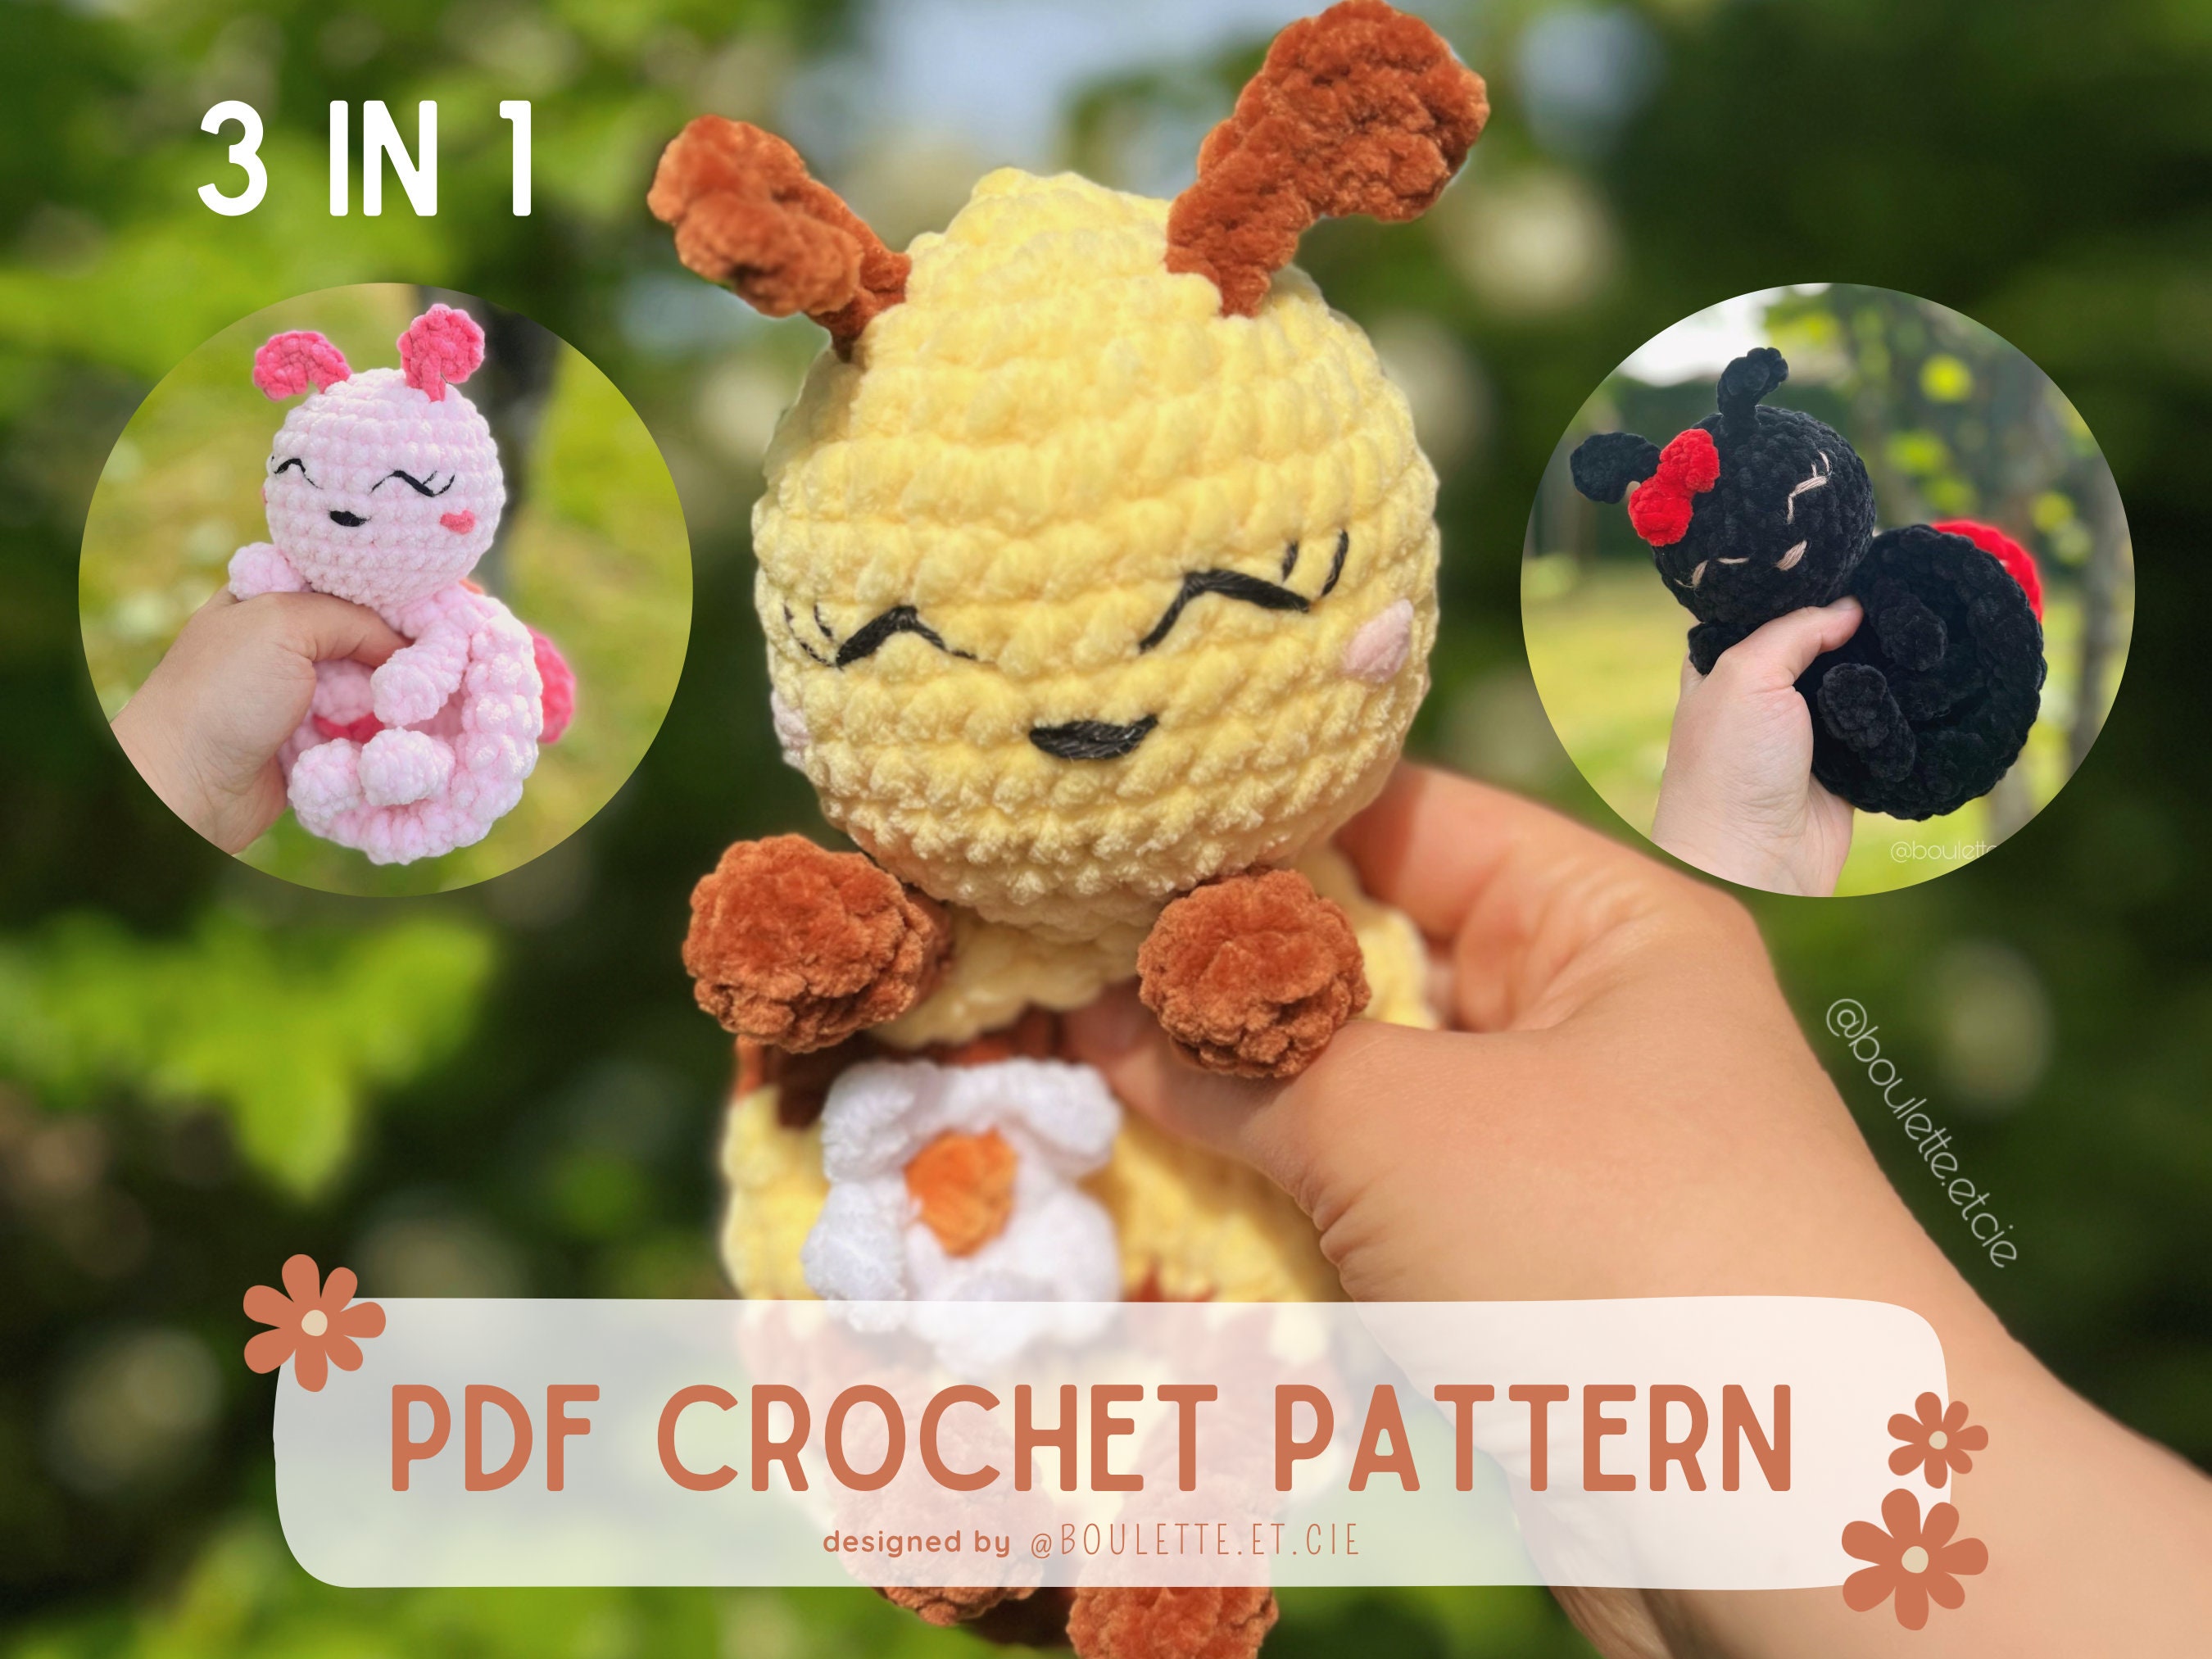  PP OPOUNT Complete Crochet Kit for Beginners, Cute Bee